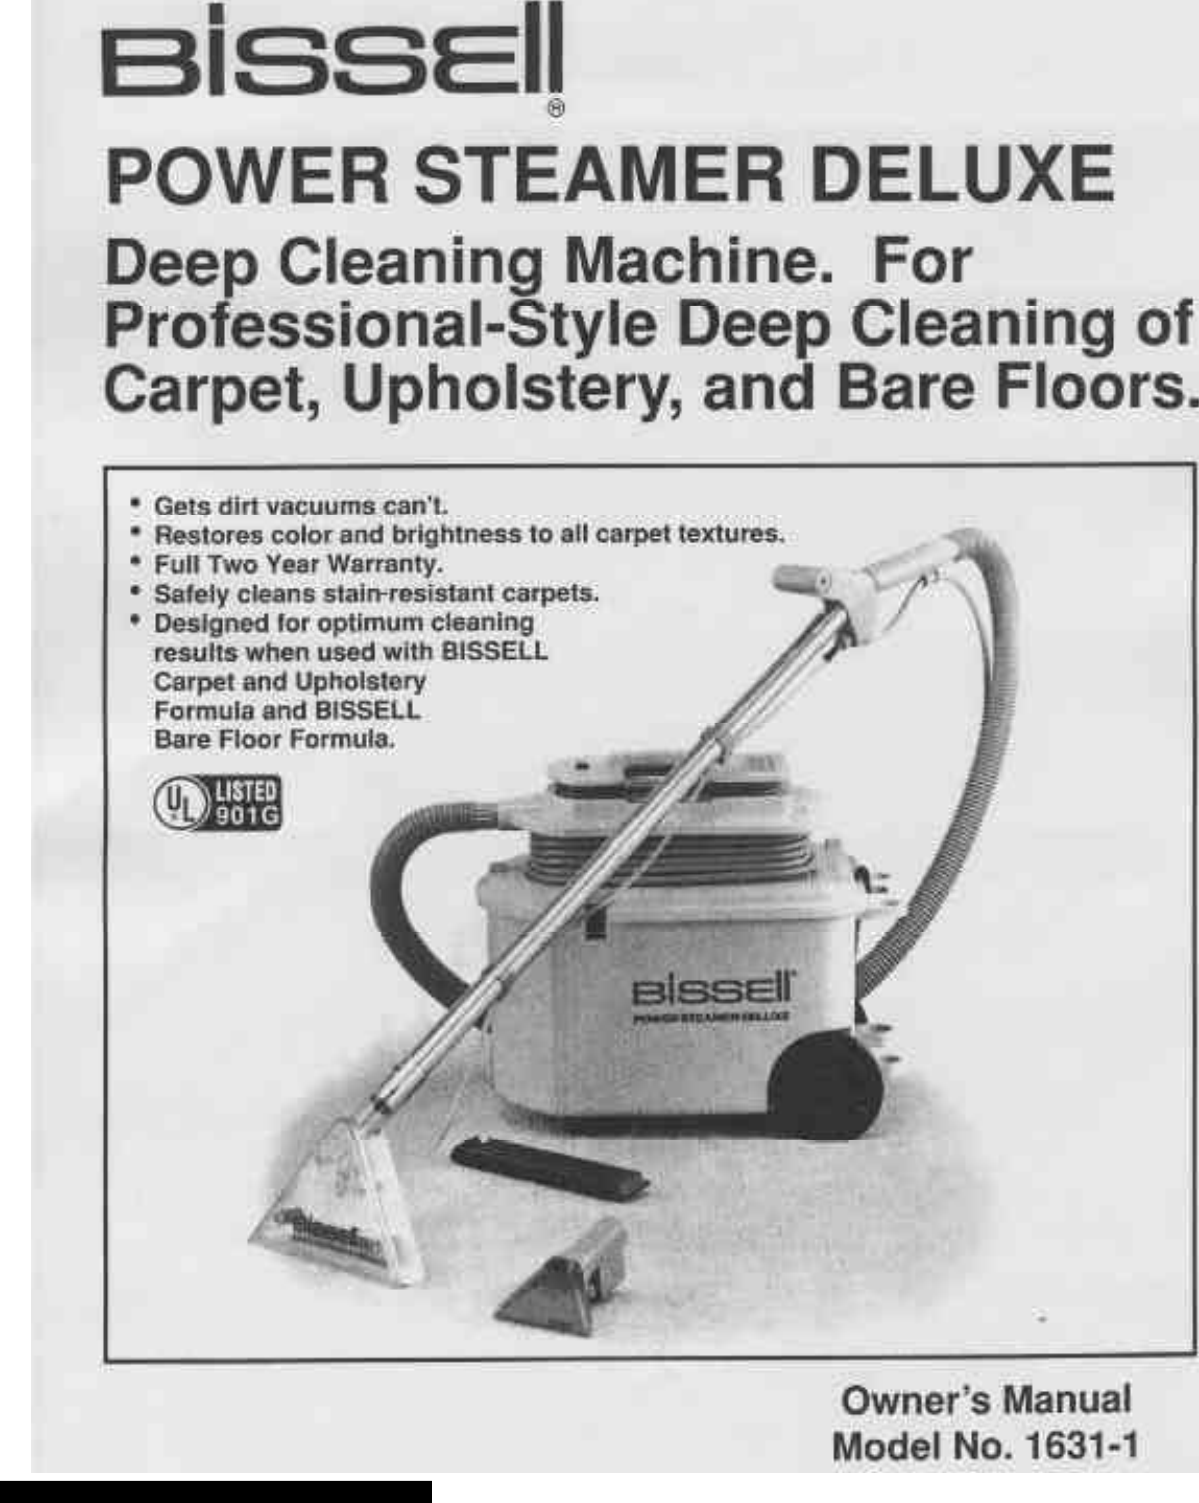 Page 1 of 10 - Bissell Bissell-Power-Steamer-Deluxe-1631-1-Owners-Manual-820202 ManualsLib - Makes It Easy To Find Manuals Online! User Manual